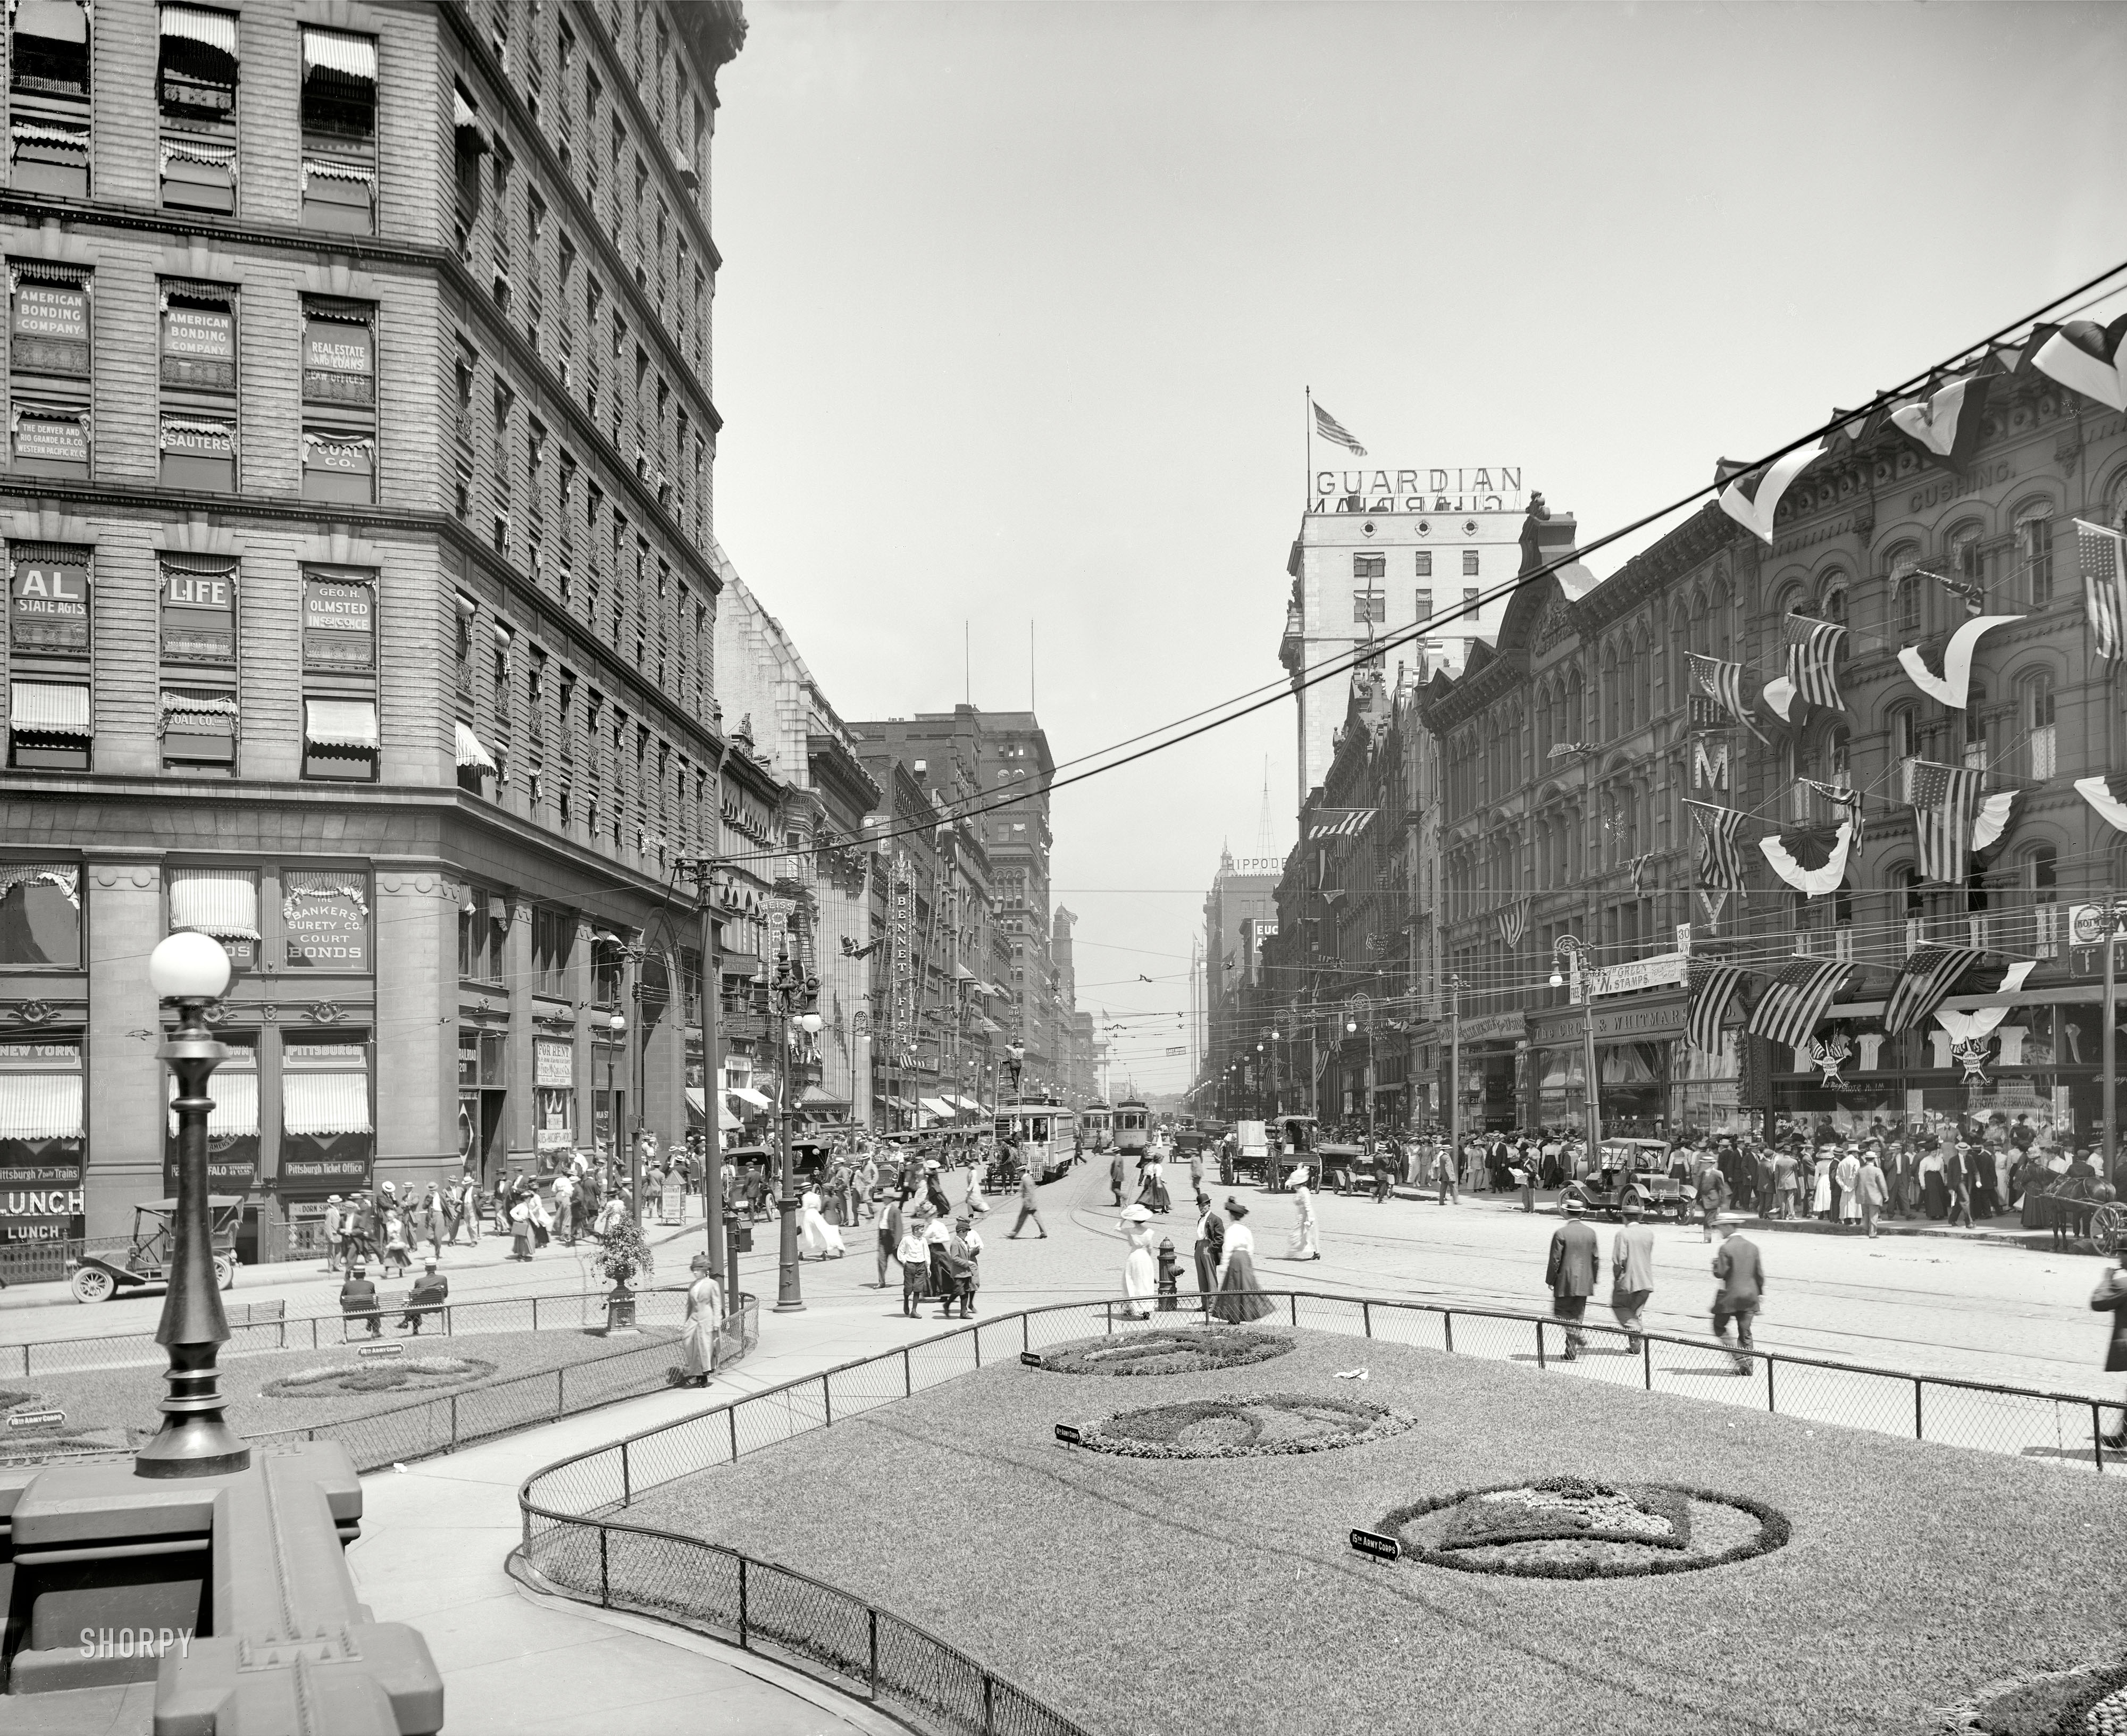 Cleveland, Ohio, circa 1911. "Euclid Avenue, east from Public Square." A close-up of the greenery at the base of the Soldiers' and Sailors' Monument seen in the previous post. 8x10 inch glass negative, Detroit Publishing Co. View full size.